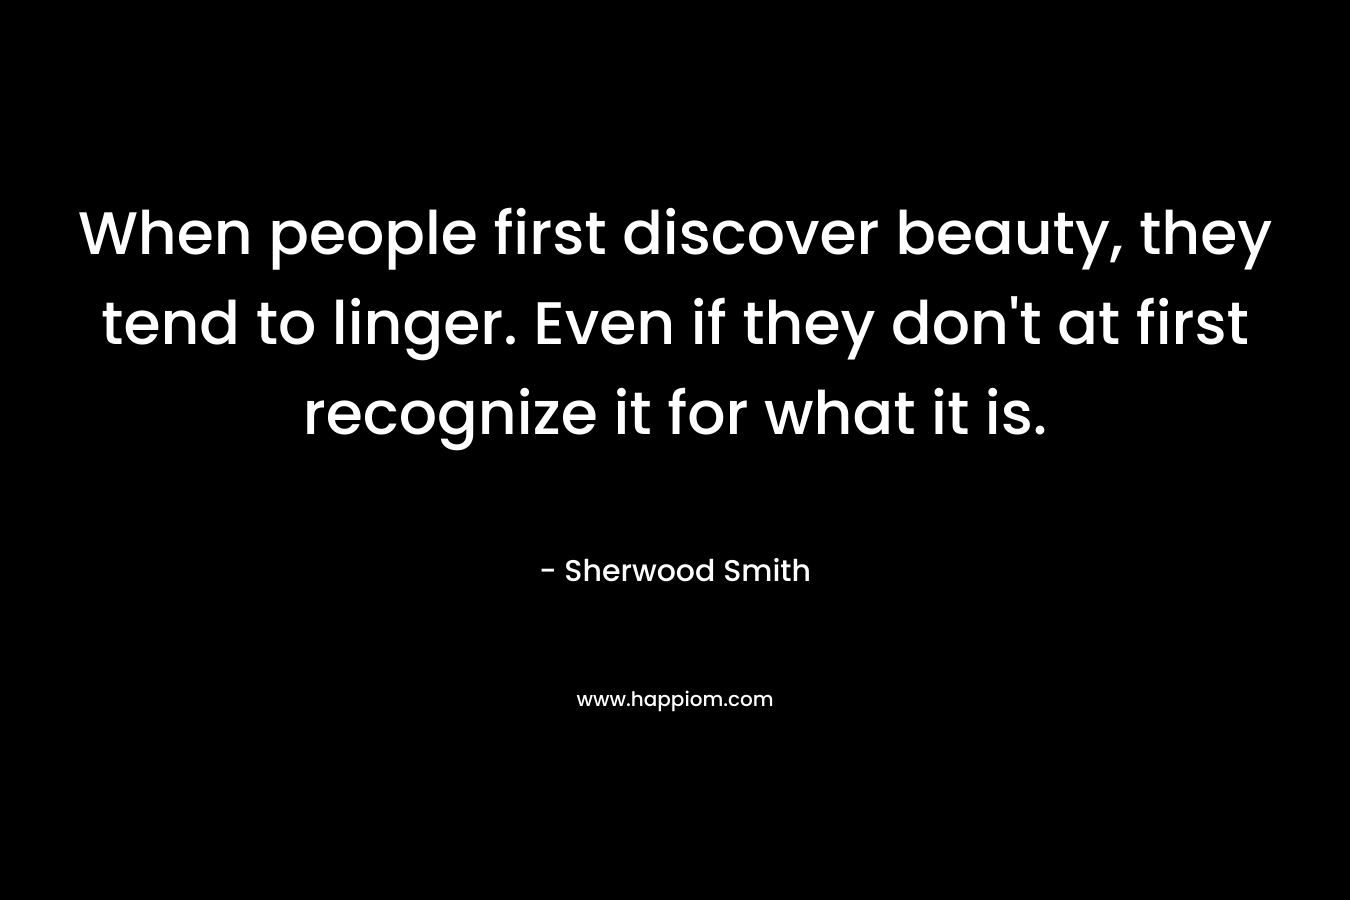 When people first discover beauty, they tend to linger. Even if they don’t at first recognize it for what it is. – Sherwood Smith